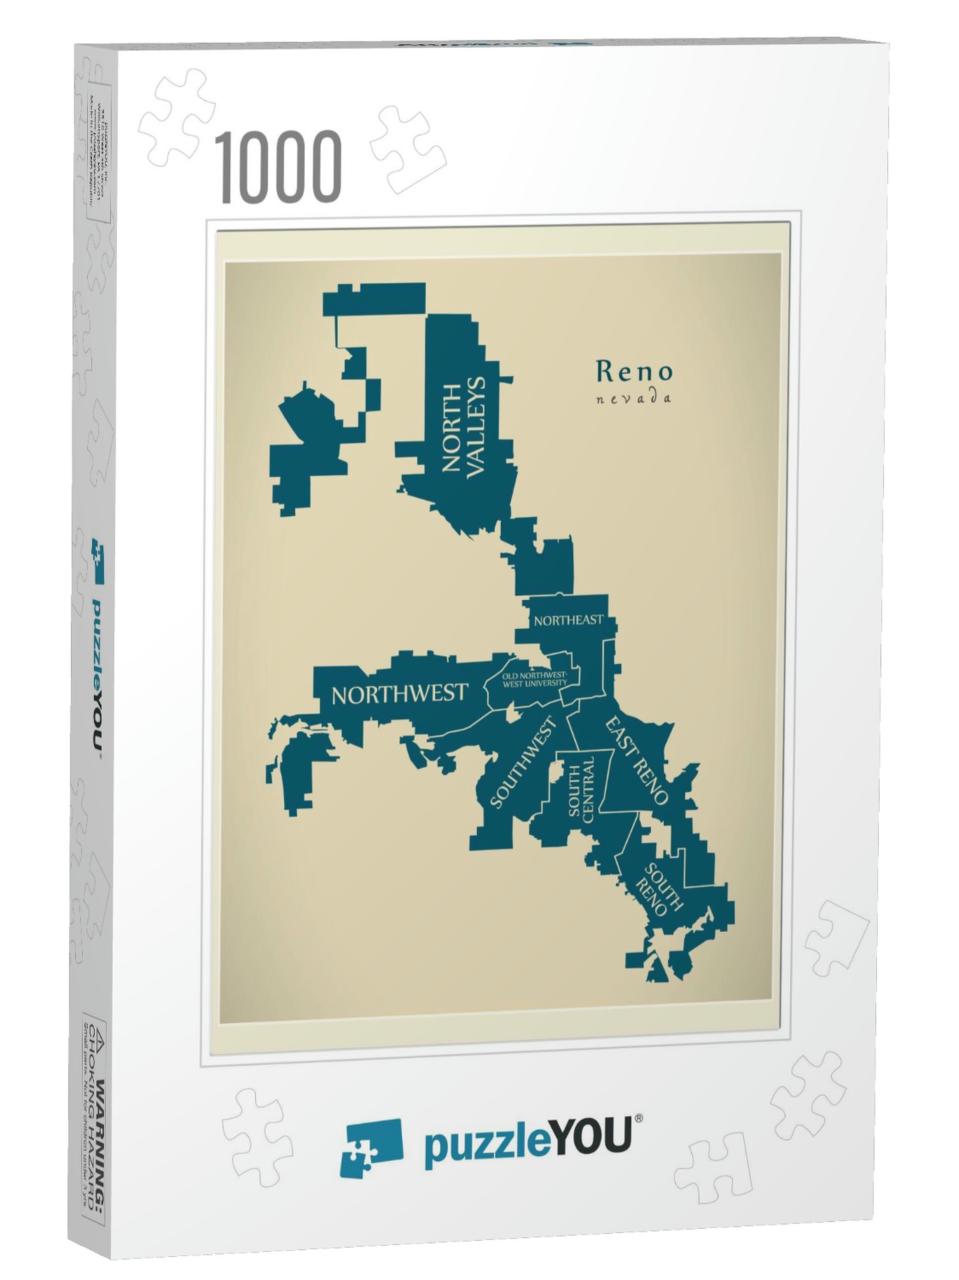 Modern City Map - Reno Nevada City of the USA with Neighbo... Jigsaw Puzzle with 1000 pieces